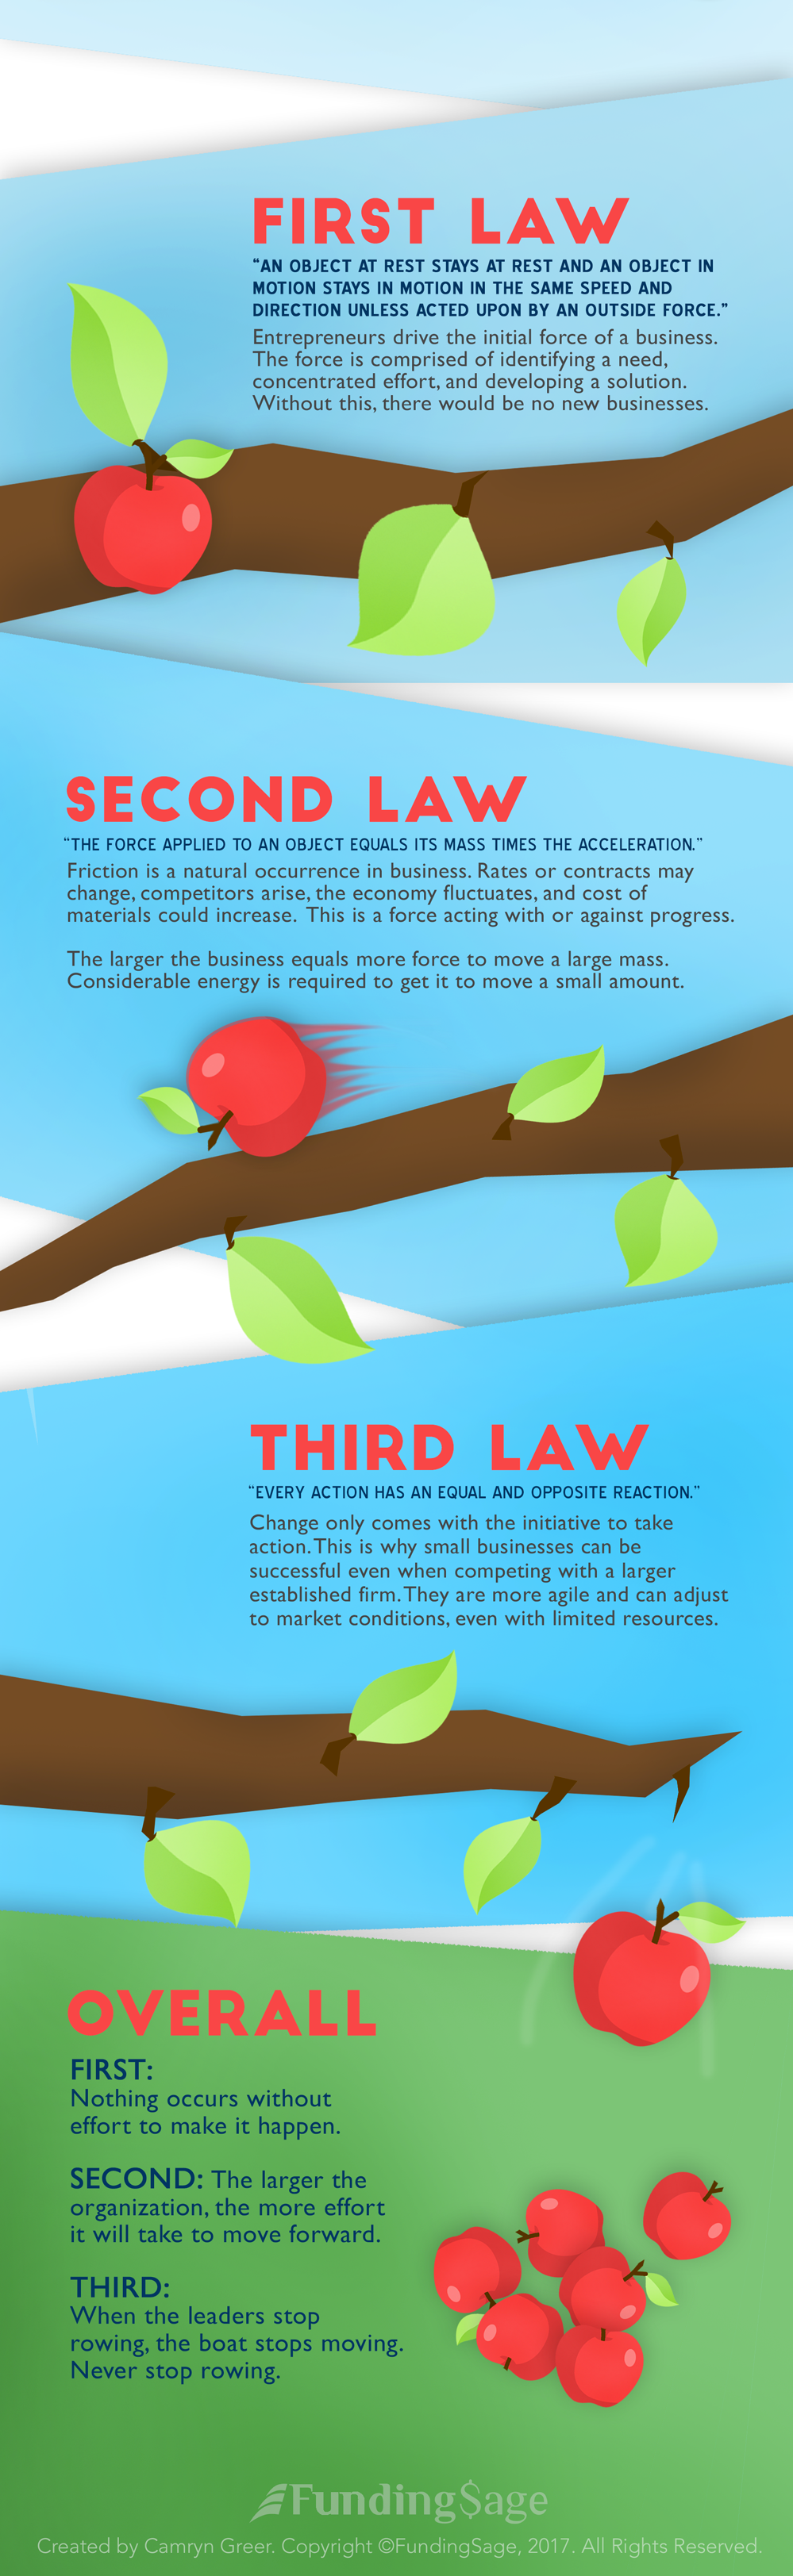 How To Create An Infographic On Newtons Laws